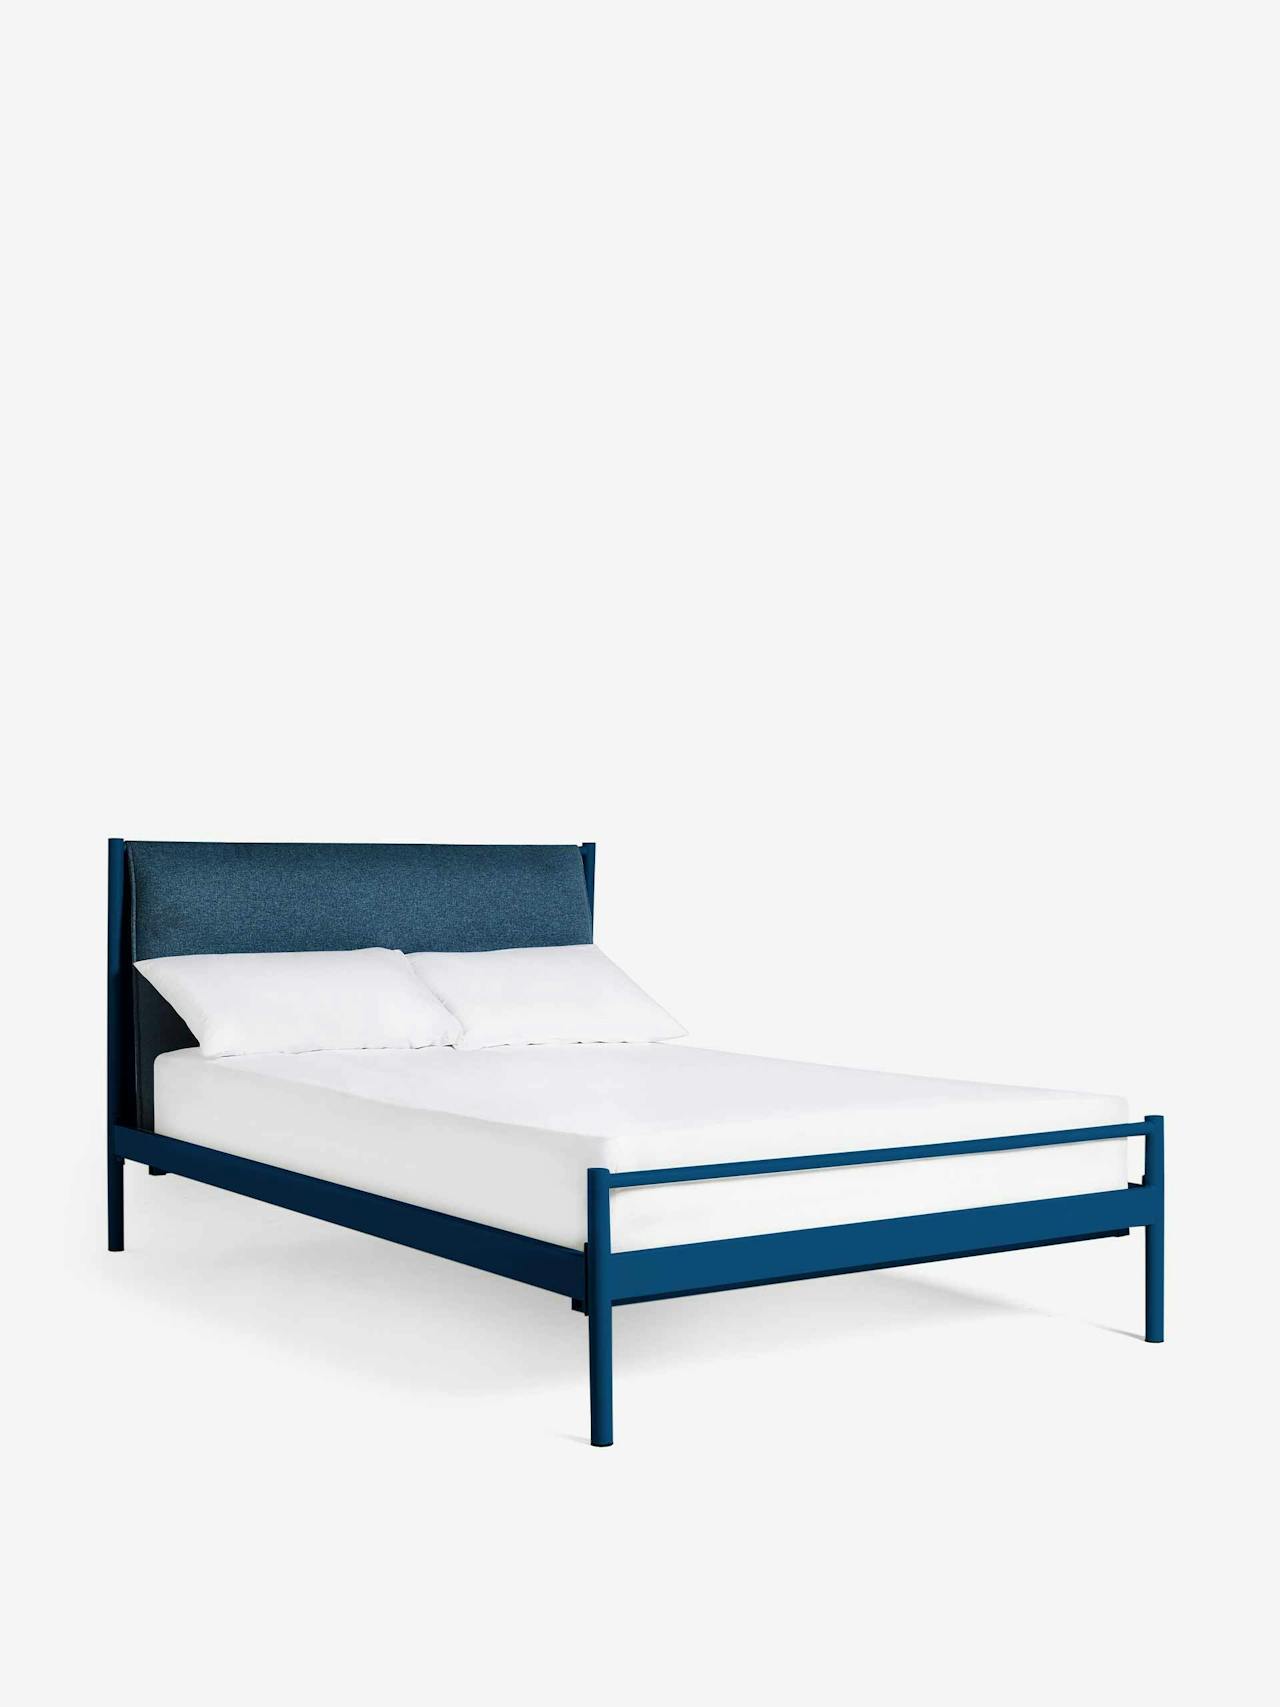 Carouso bed